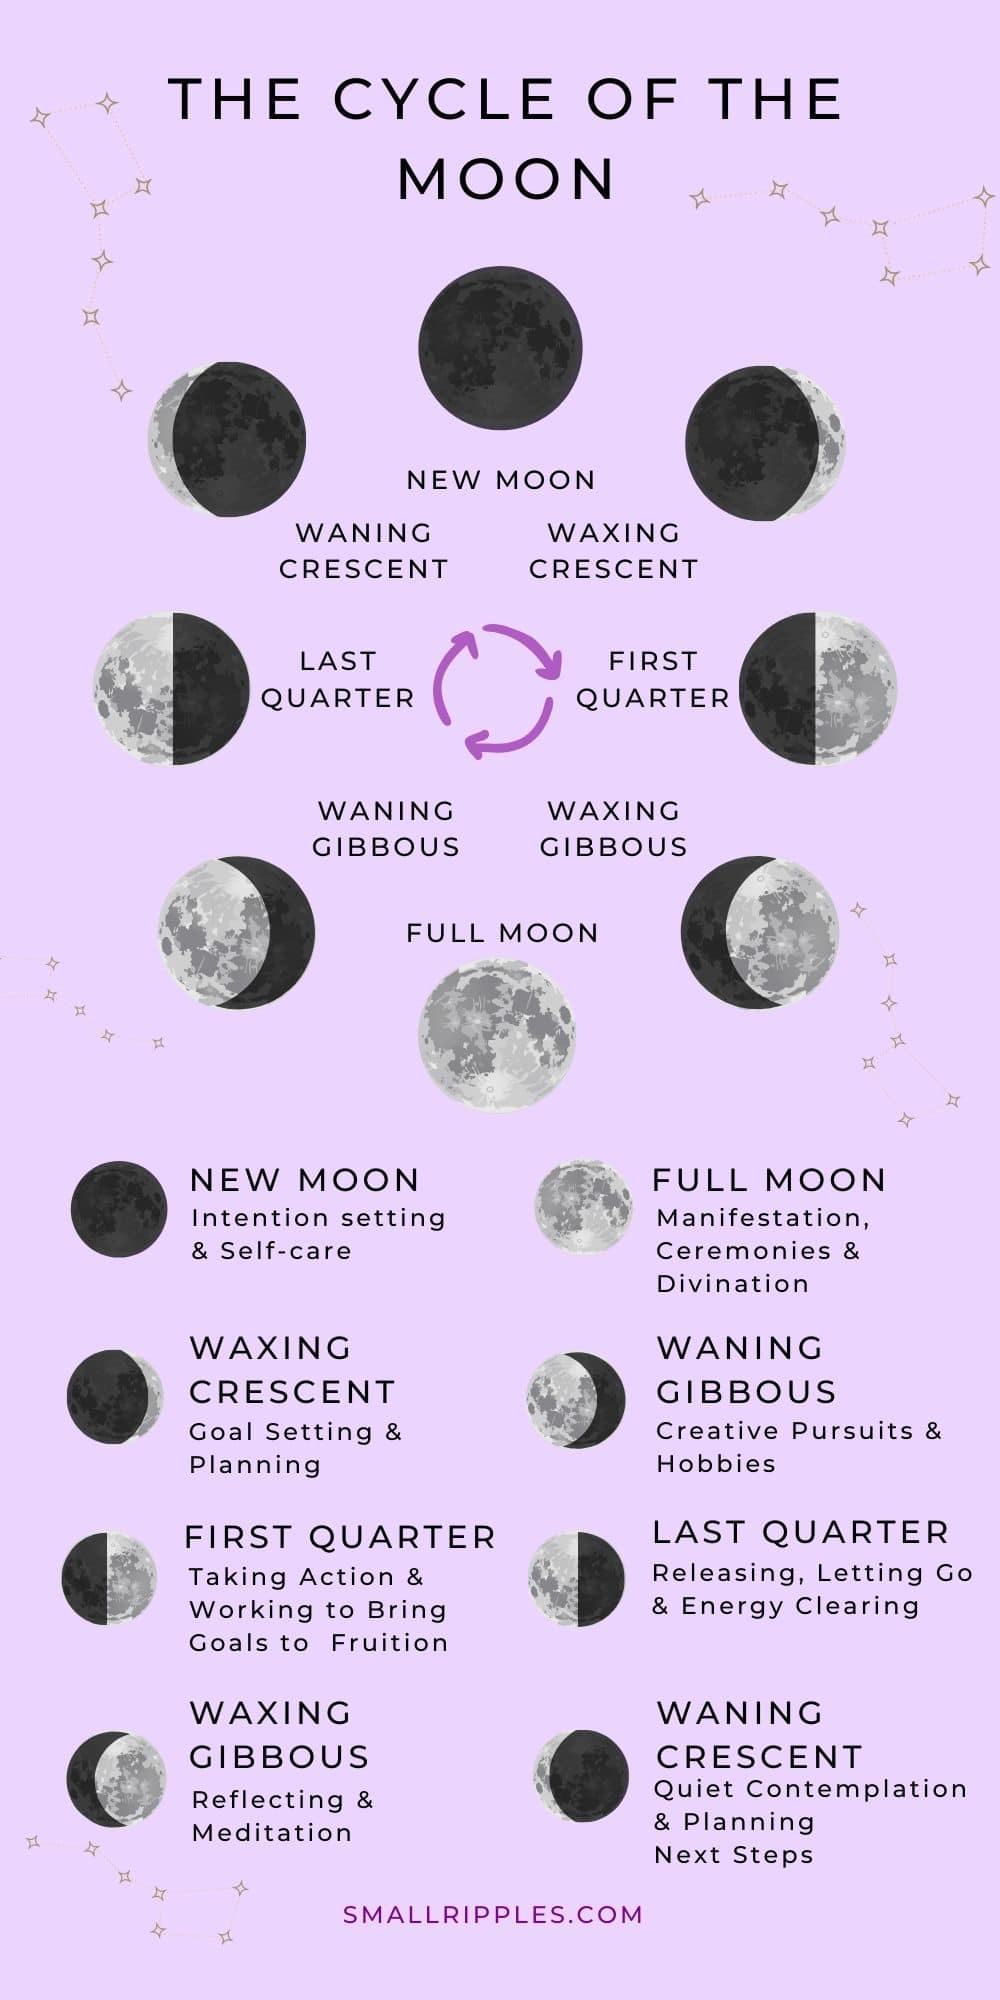 How to Make the Most of Every Moon Phase